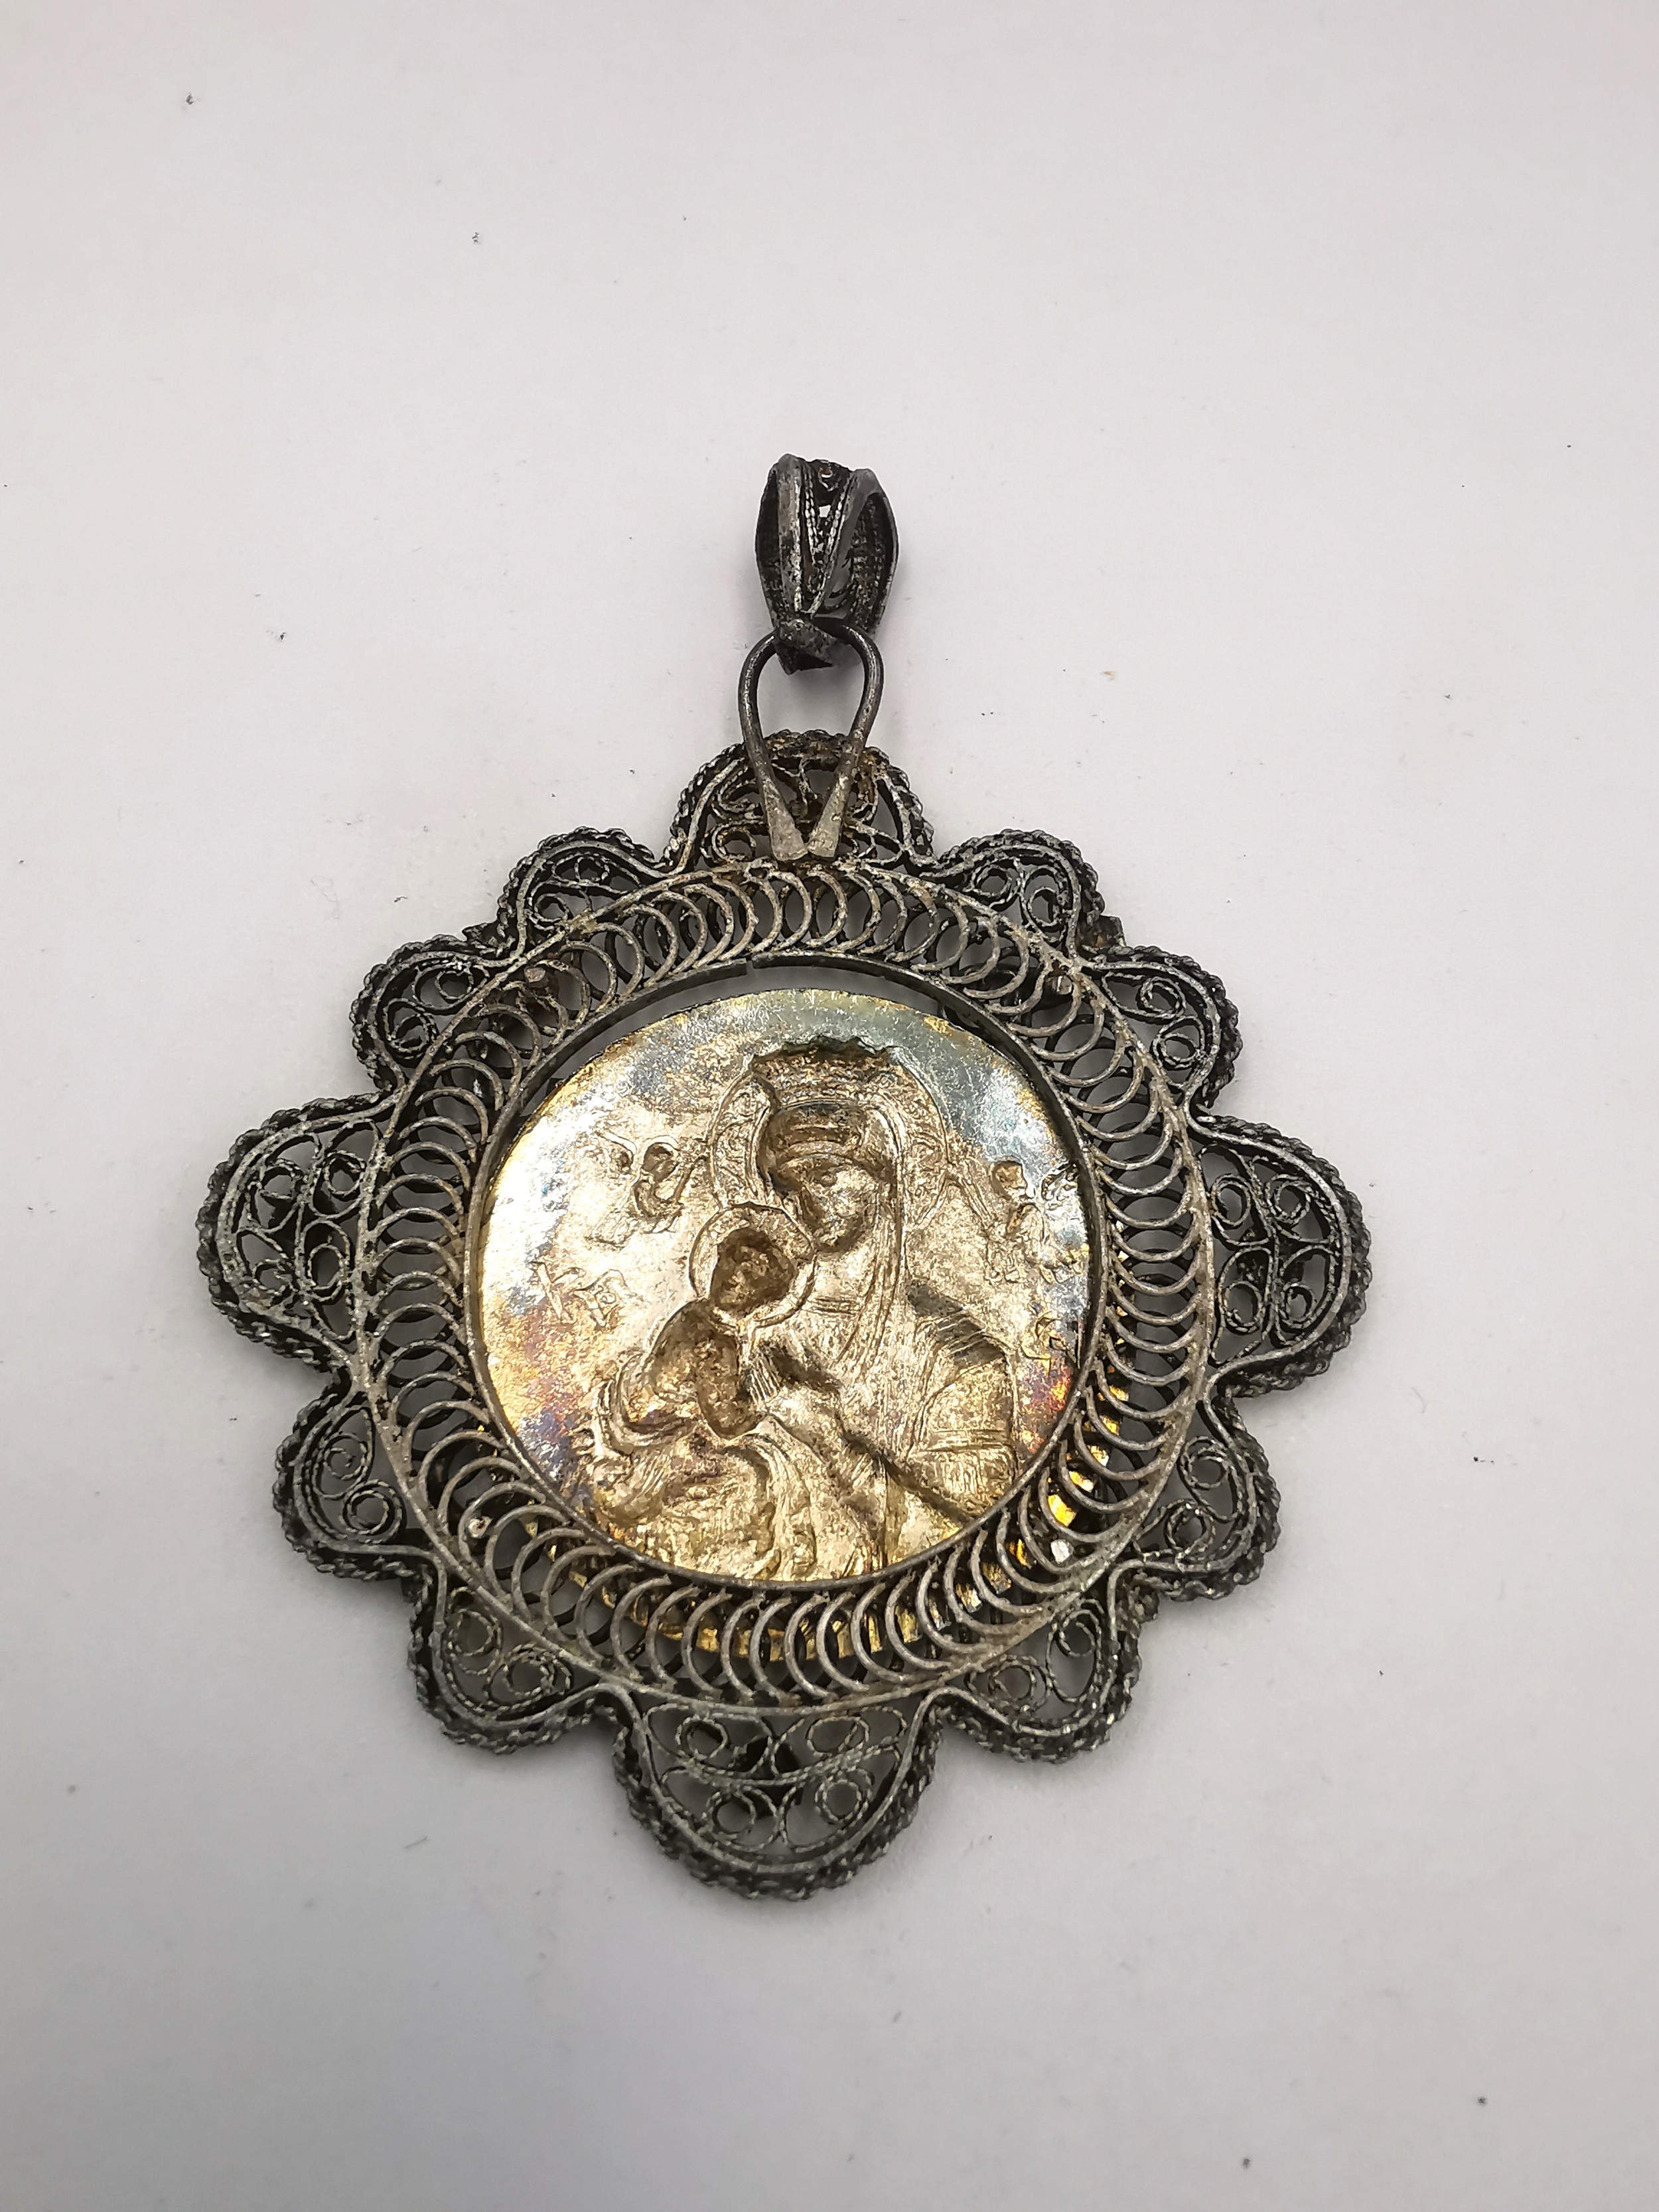 A collection of religious medallions, including a filigree wirework medallion of Mary and Jesus, a - Image 4 of 17